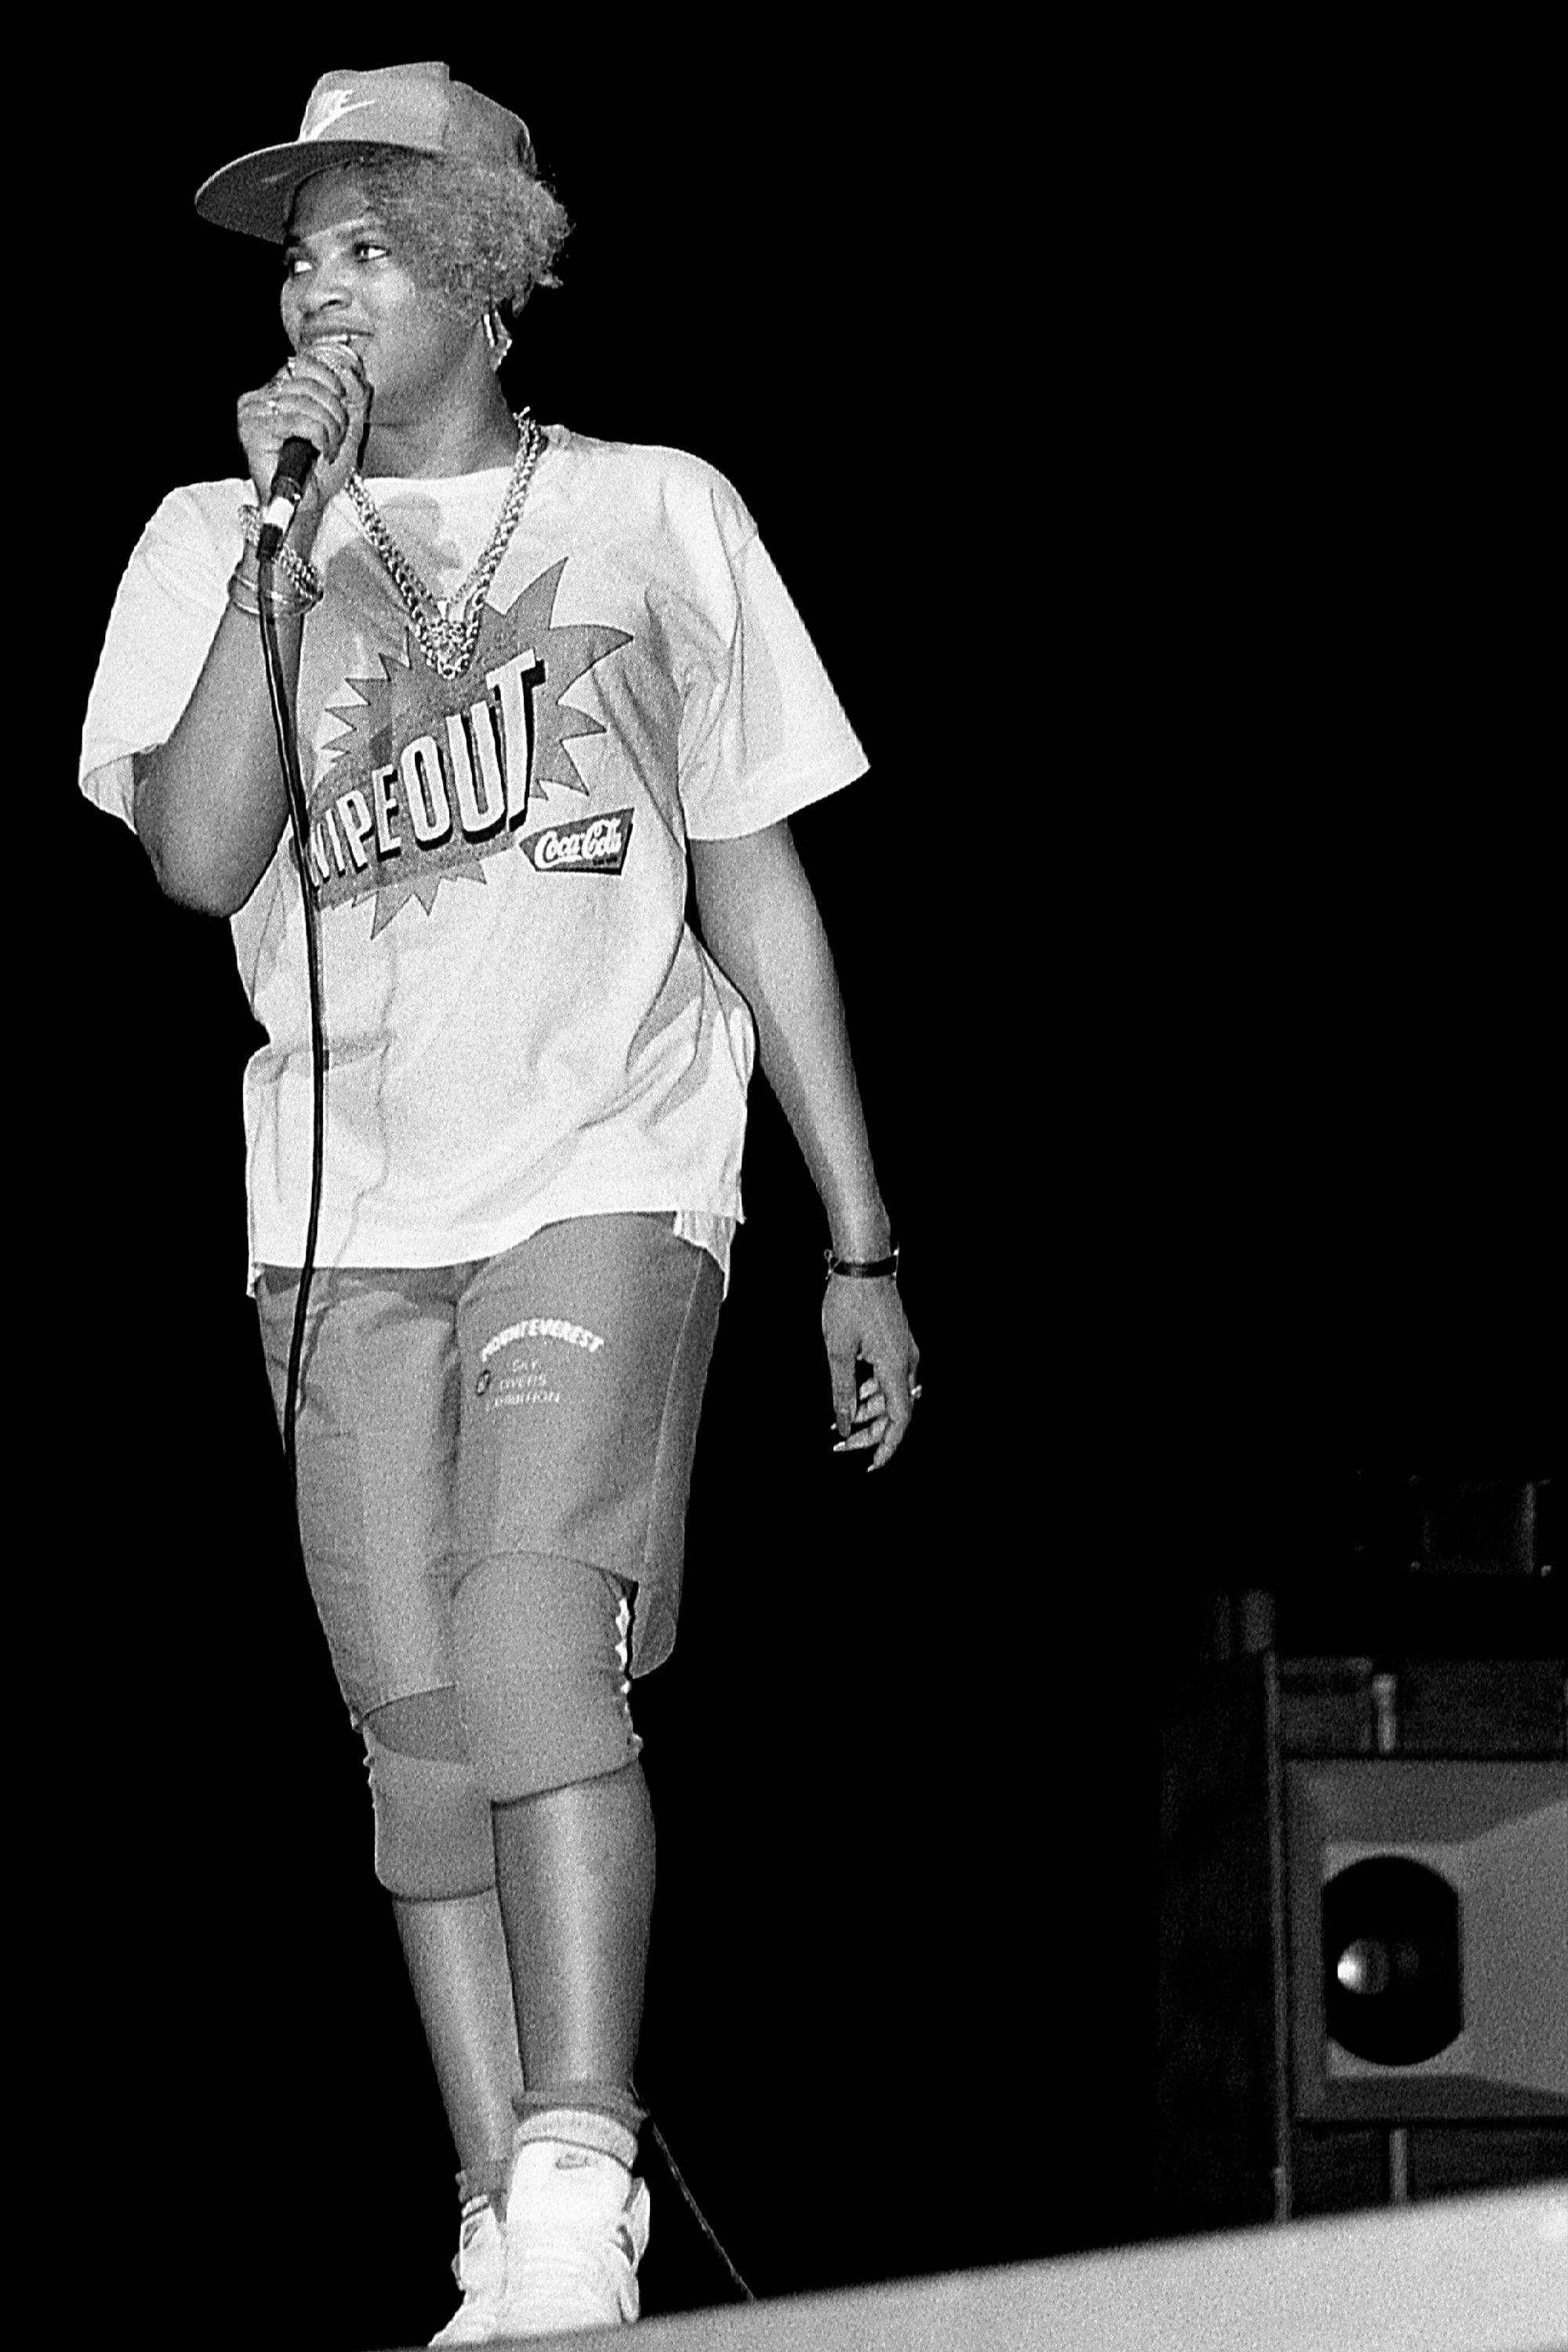 Salt from Salt-N-Pepa perform at the Holiday Star Theatre in
Merrillville, Indiana 1987